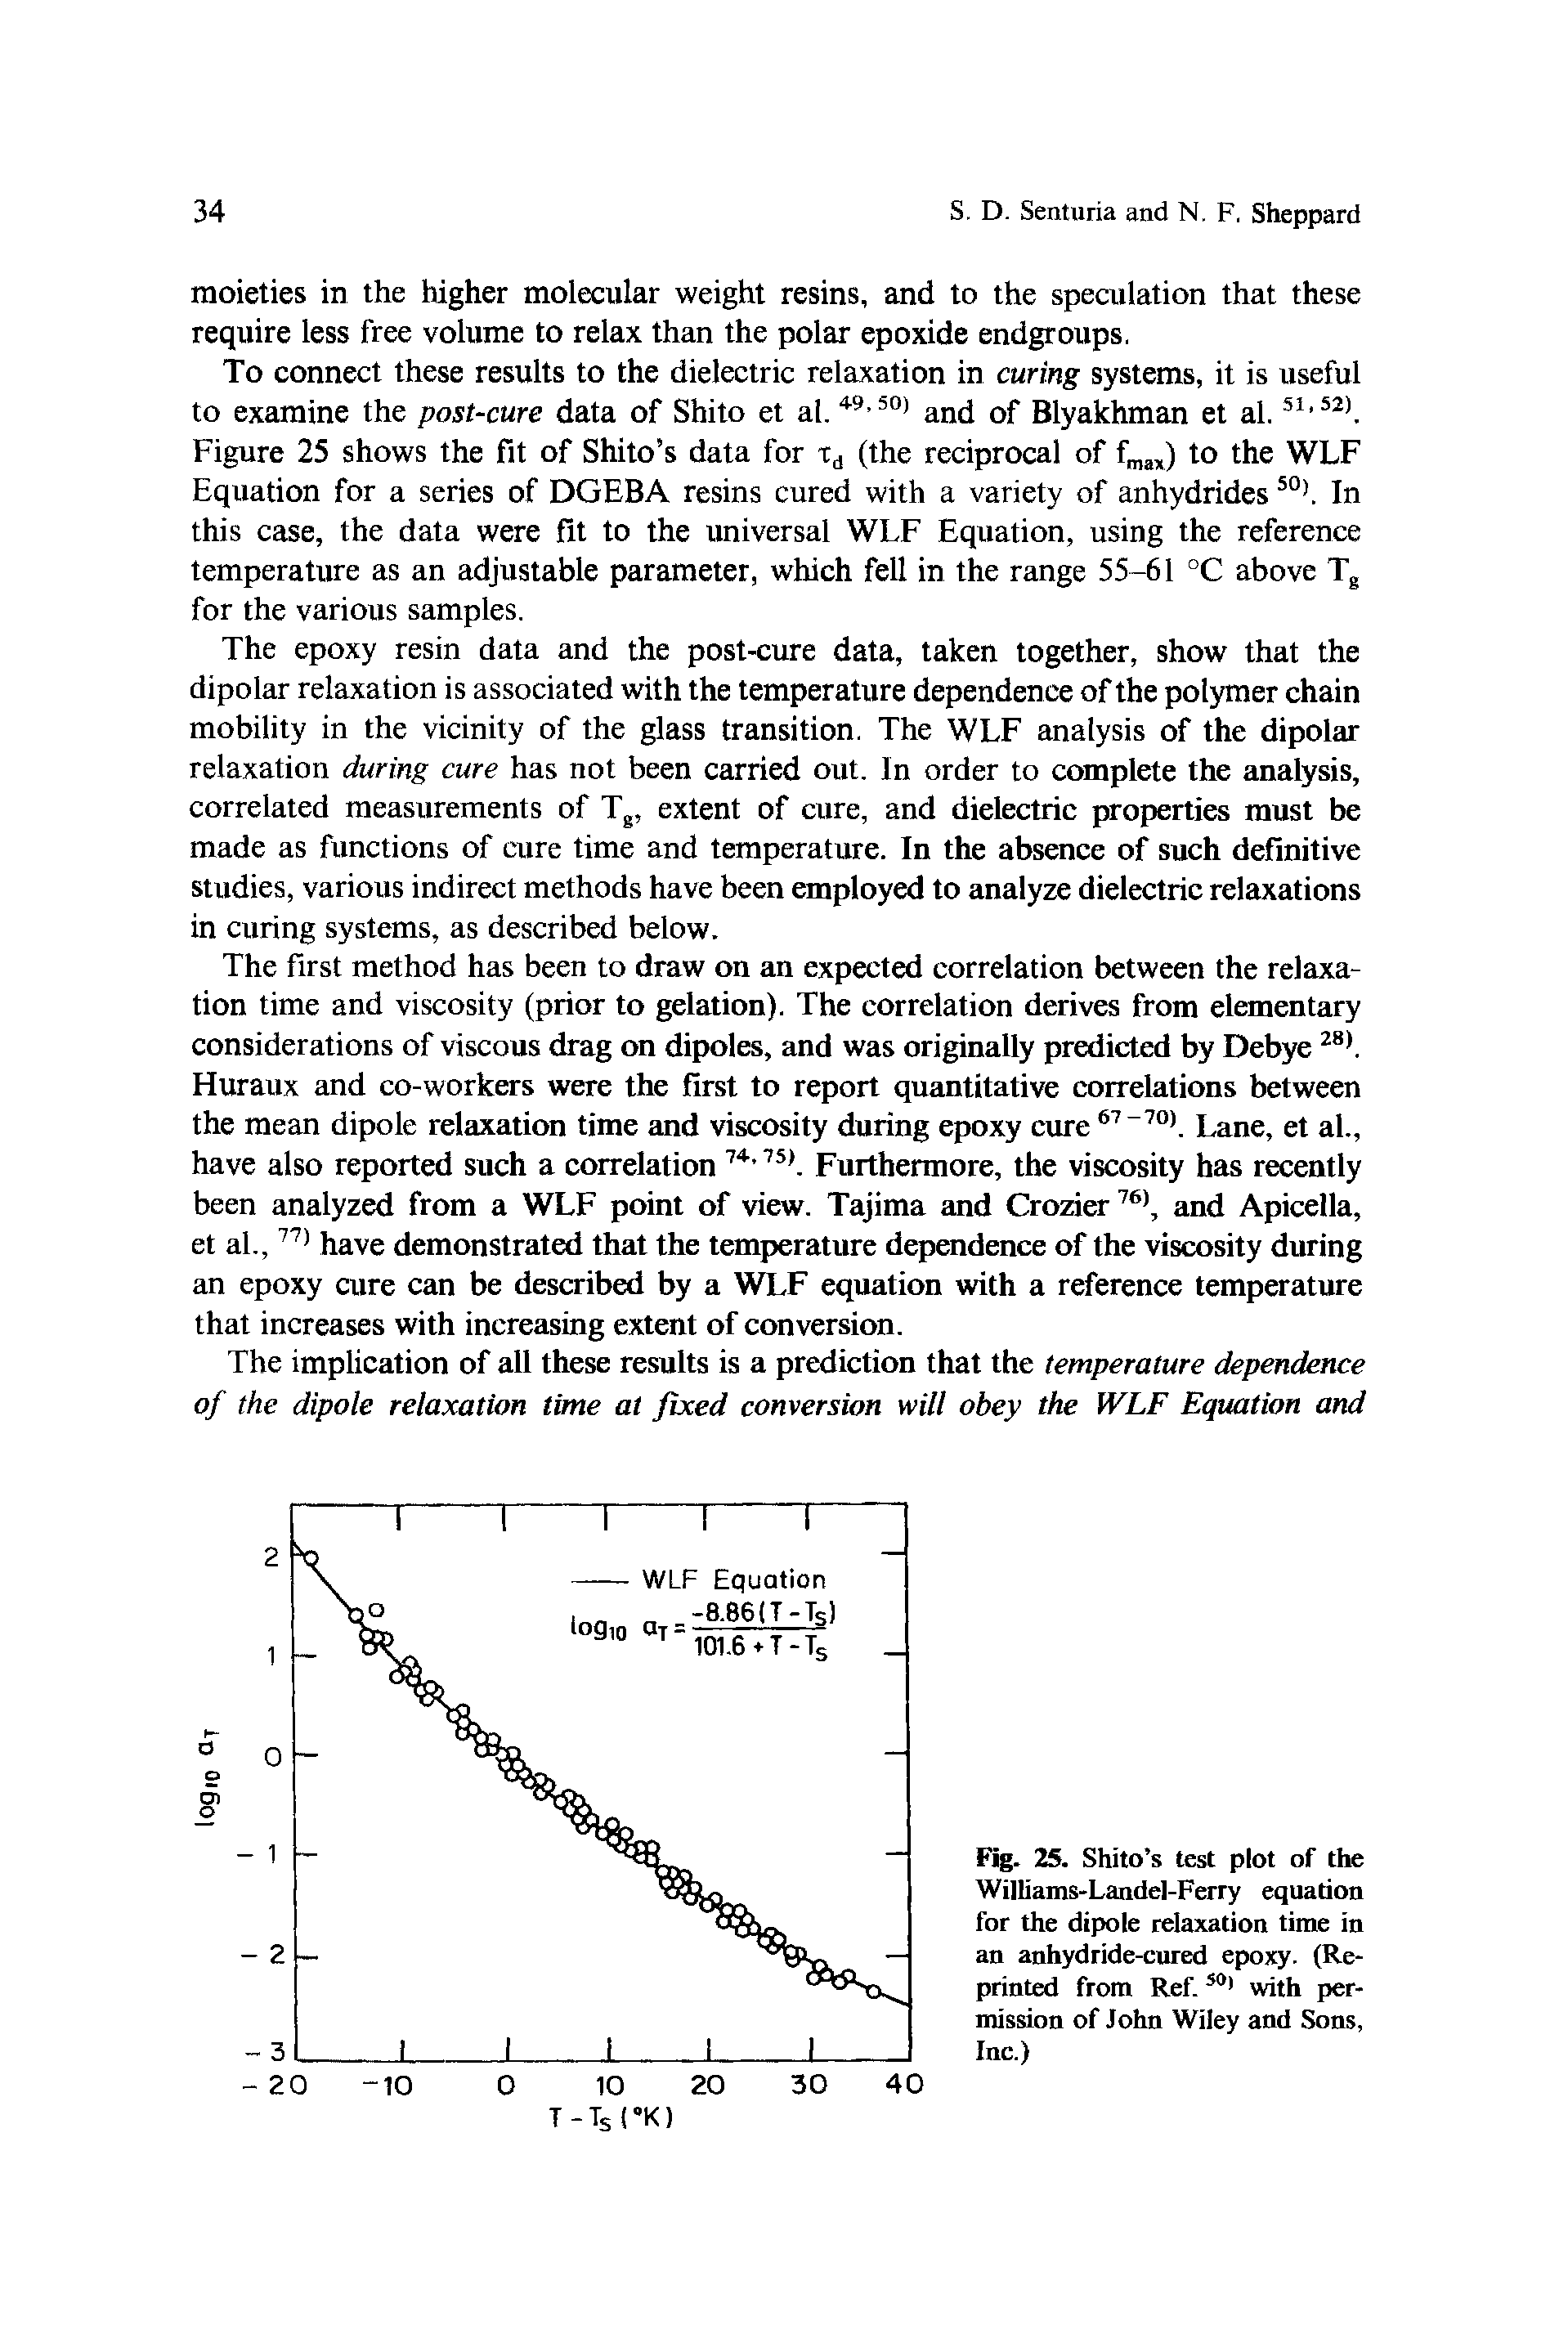 Fig. 25. Shito s test plot of the Williams-Landel-Ferry equation for the dipole relaxation time in an anhydride-cured epoxy. (Reprinted from Ref.50) with permission of John Wiley and Sons, Inc.)...